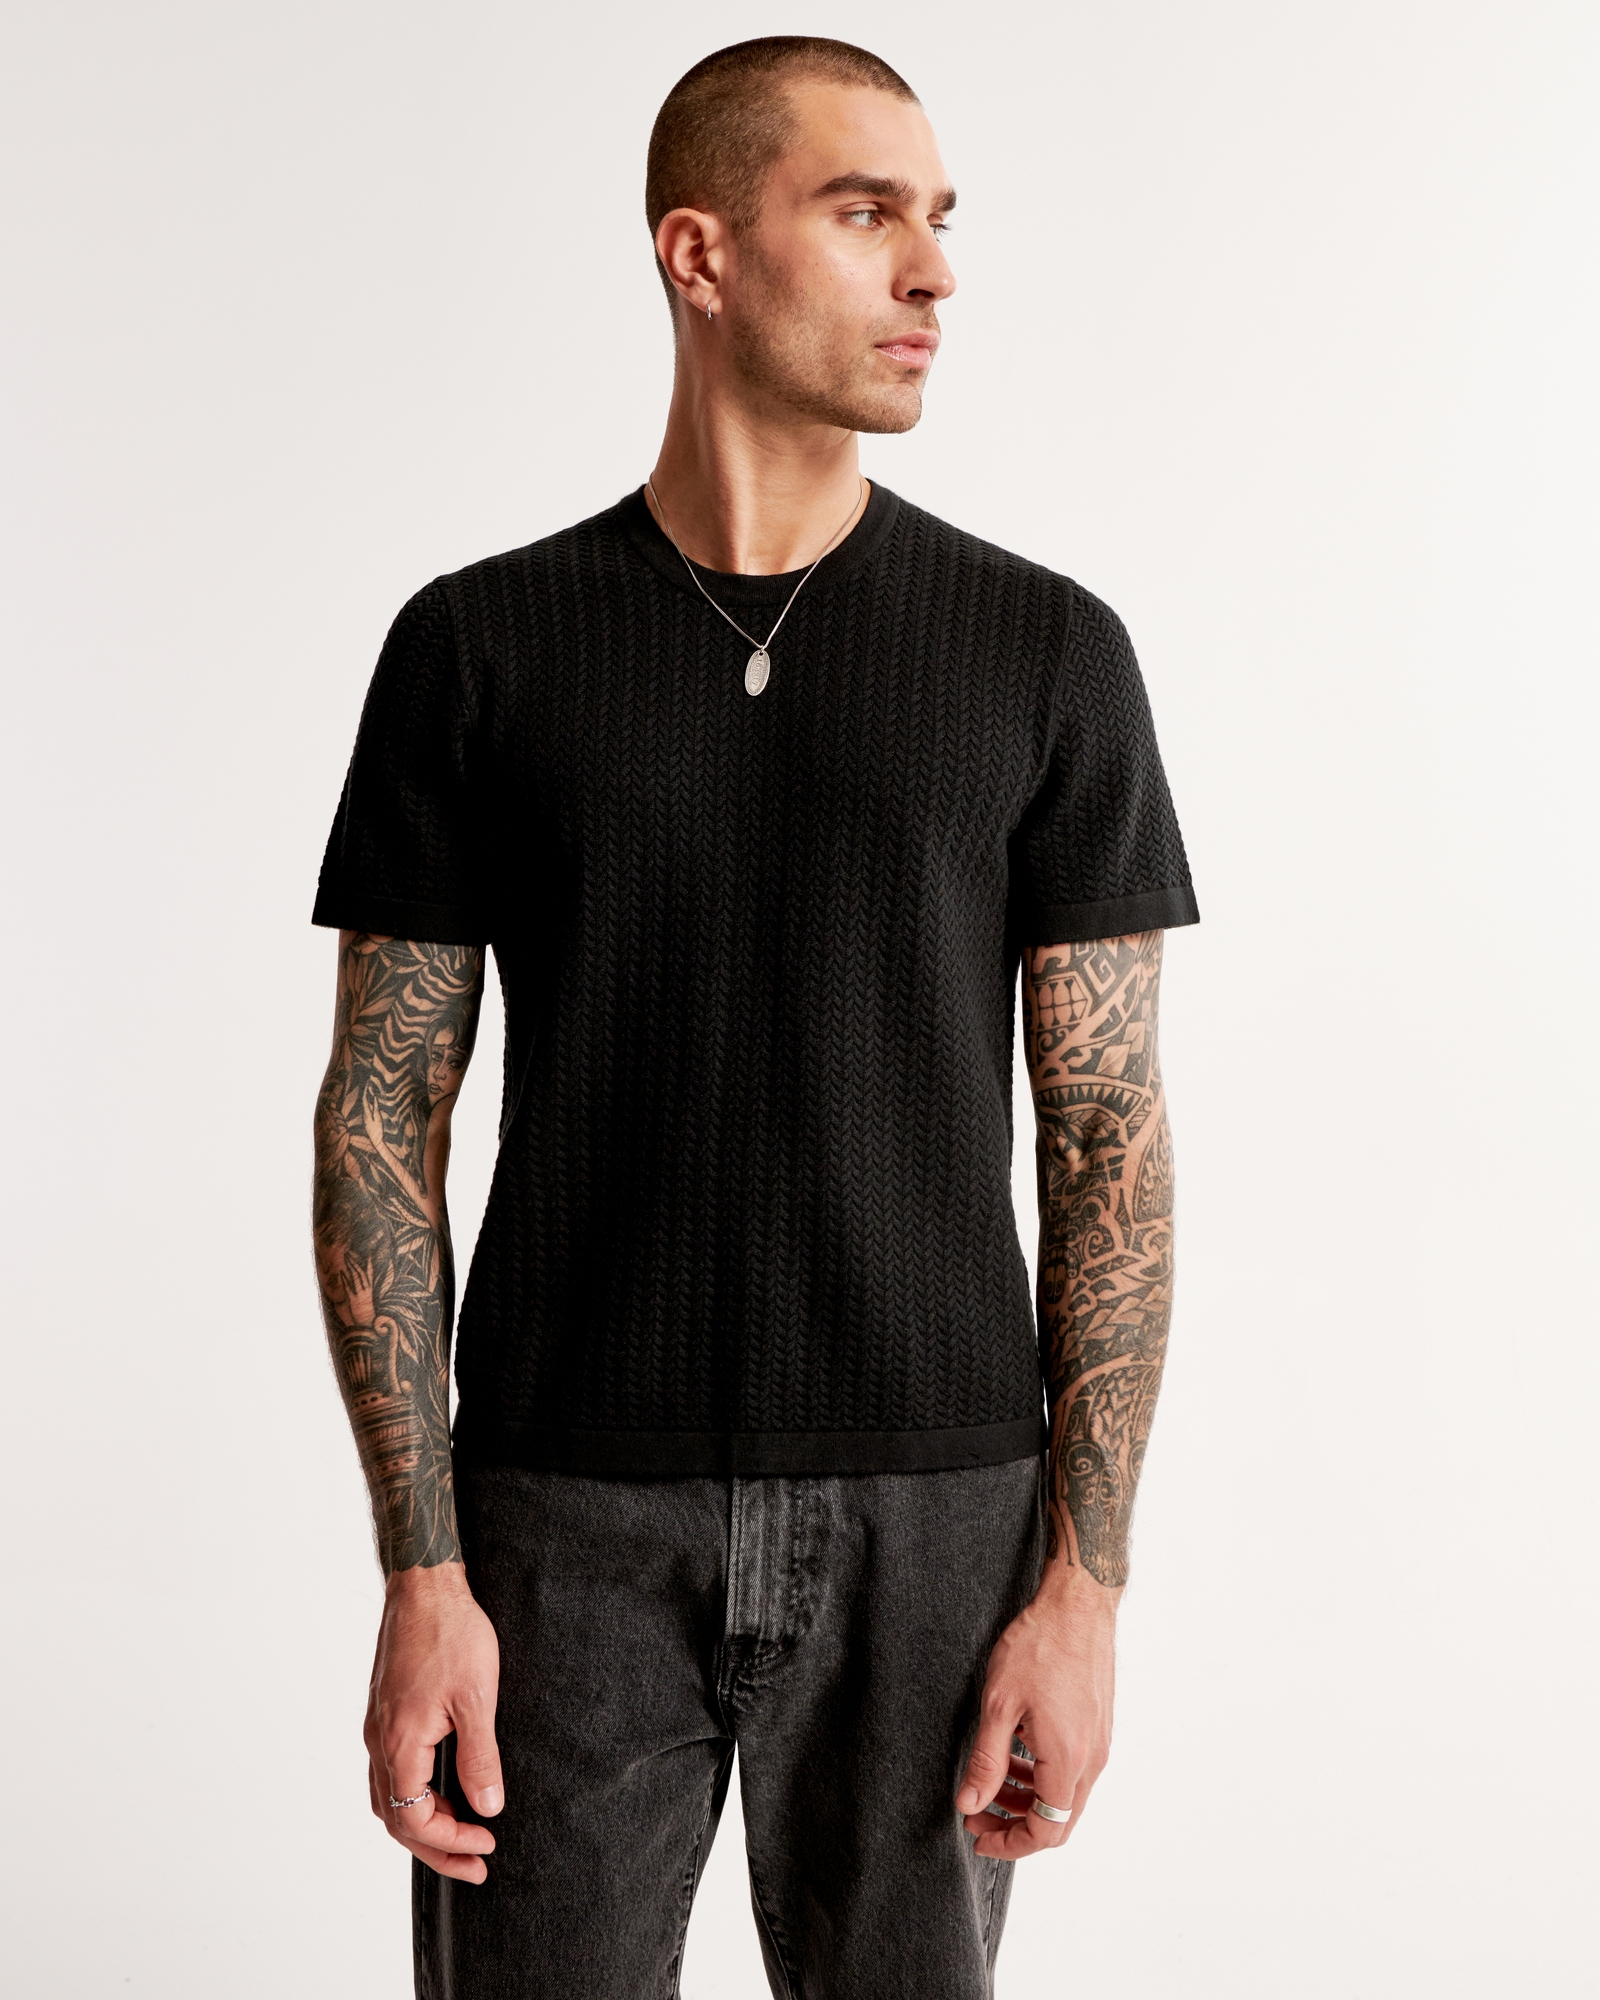 Stitched Textured Tee